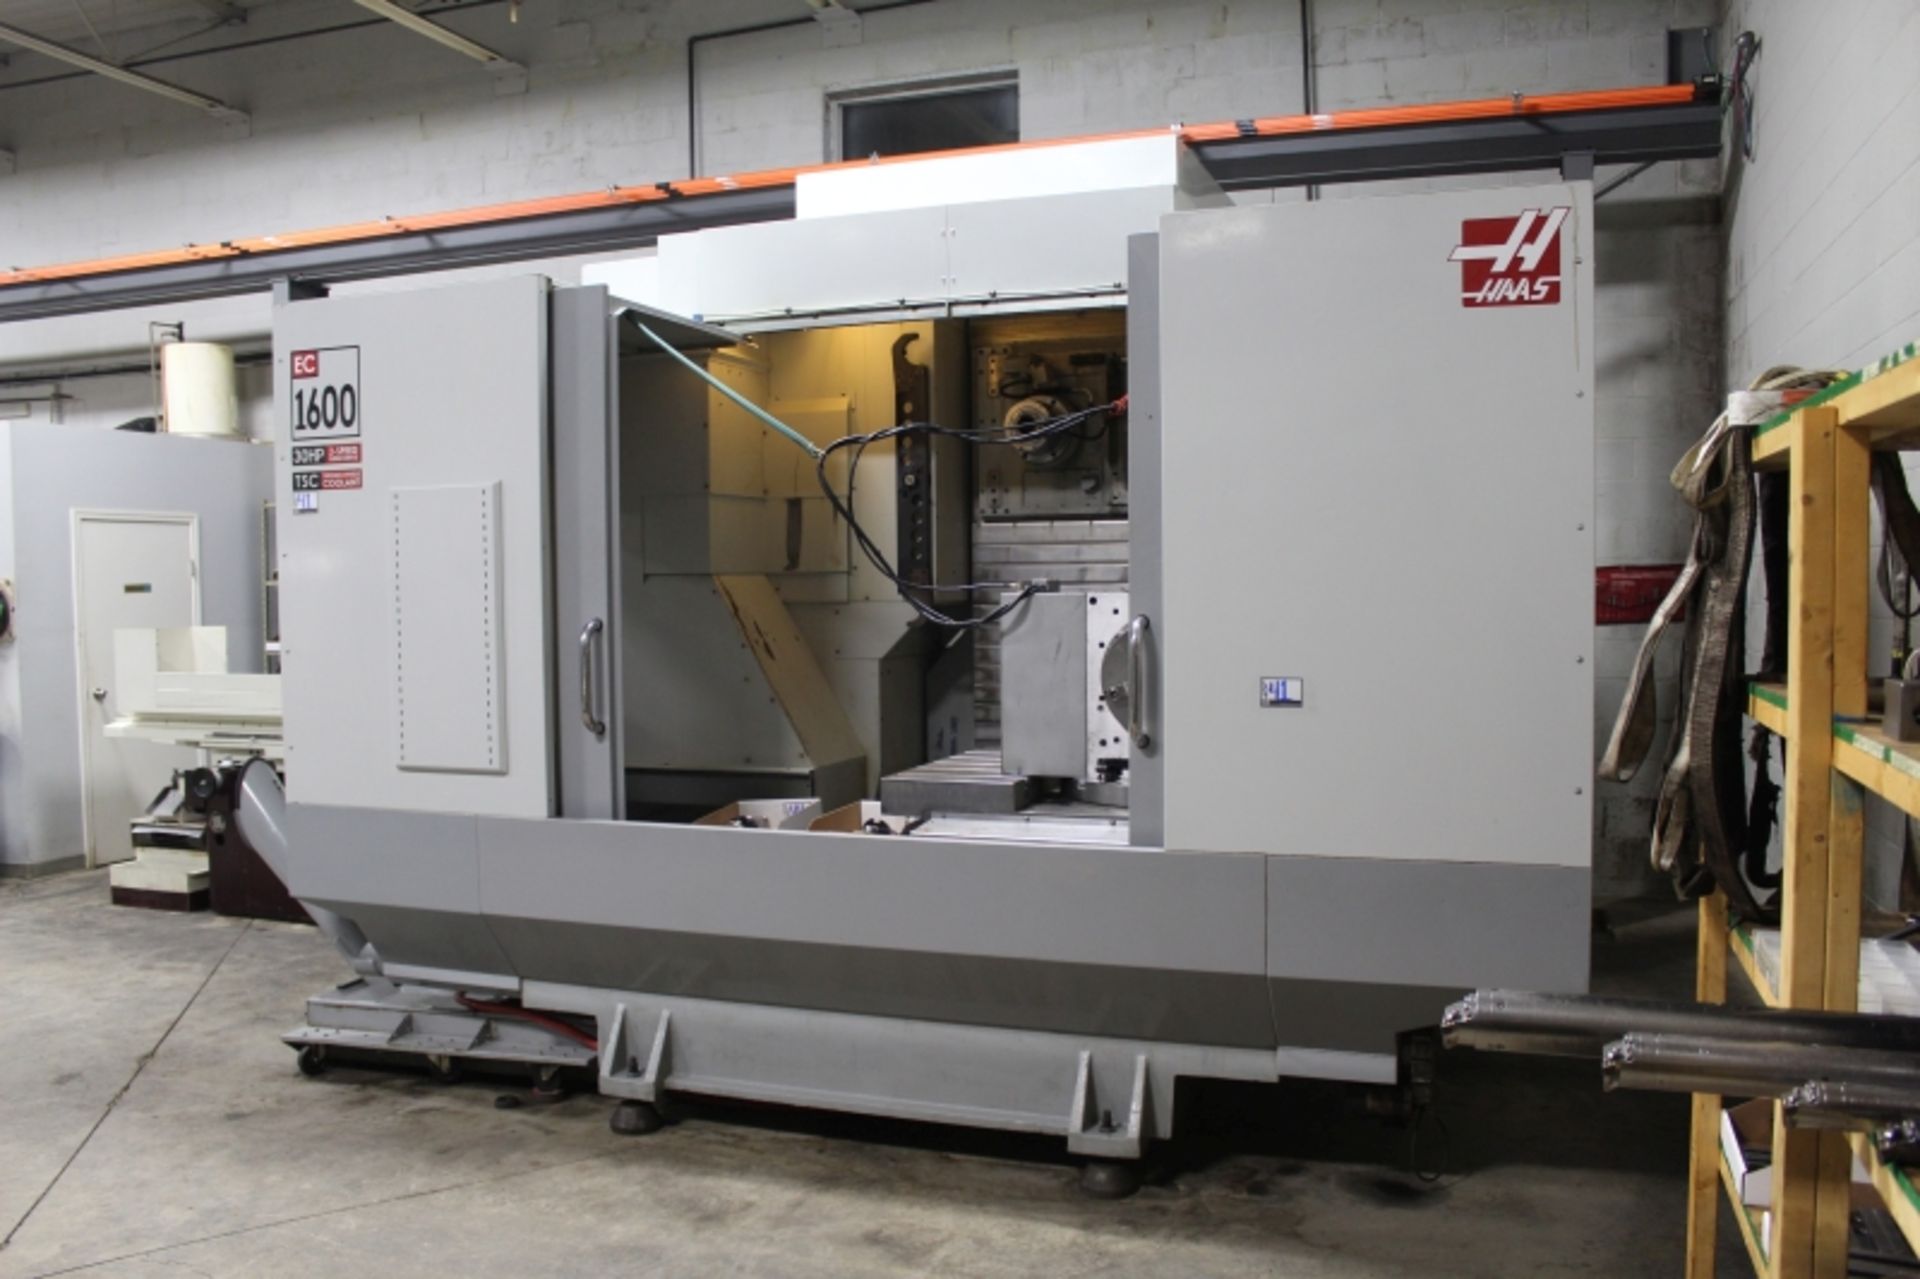 Haas EC-1600-4X, 5-Axis, 64” x 50” x 32” trvls, 7500 RPM, CT50, 30 ATC, CTS, S/N 2052737, New - Image 8 of 13